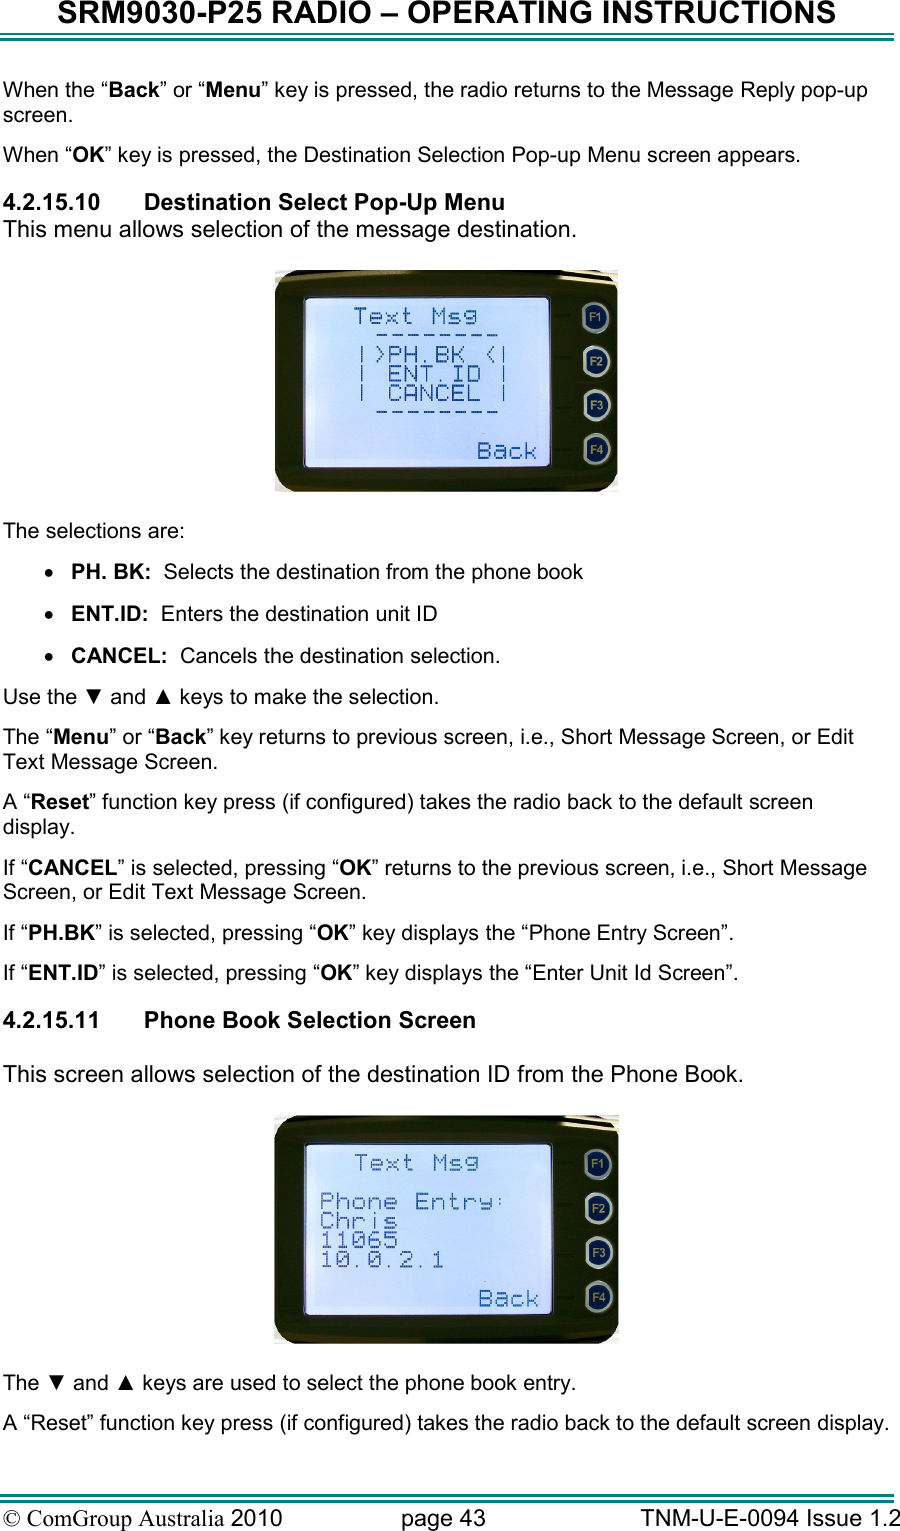 SRM9030-P25 RADIO – OPERATING INSTRUCTIONS © ComGroup Australia 2010  page 43   TNM-U-E-0094 Issue 1.2 When the “Back” or “Menu” key is pressed, the radio returns to the Message Reply pop-up screen. When “OK” key is pressed, the Destination Selection Pop-up Menu screen appears. 4.2.15.10  Destination Select Pop-Up Menu This menu allows selection of the message destination.    The selections are: • PH. BK:  Selects the destination from the phone book • ENT.ID:  Enters the destination unit ID • CANCEL:  Cancels the destination selection. Use the ▼ and ▲ keys to make the selection. The “Menu” or “Back” key returns to previous screen, i.e., Short Message Screen, or Edit Text Message Screen. A “Reset” function key press (if configured) takes the radio back to the default screen display. If “CANCEL” is selected, pressing “OK” returns to the previous screen, i.e., Short Message Screen, or Edit Text Message Screen. If “PH.BK” is selected, pressing “OK” key displays the “Phone Entry Screen”. If “ENT.ID” is selected, pressing “OK” key displays the “Enter Unit Id Screen”. 4.2.15.11  Phone Book Selection Screen  This screen allows selection of the destination ID from the Phone Book.    The ▼ and ▲ keys are used to select the phone book entry.  A “Reset” function key press (if configured) takes the radio back to the default screen display. 